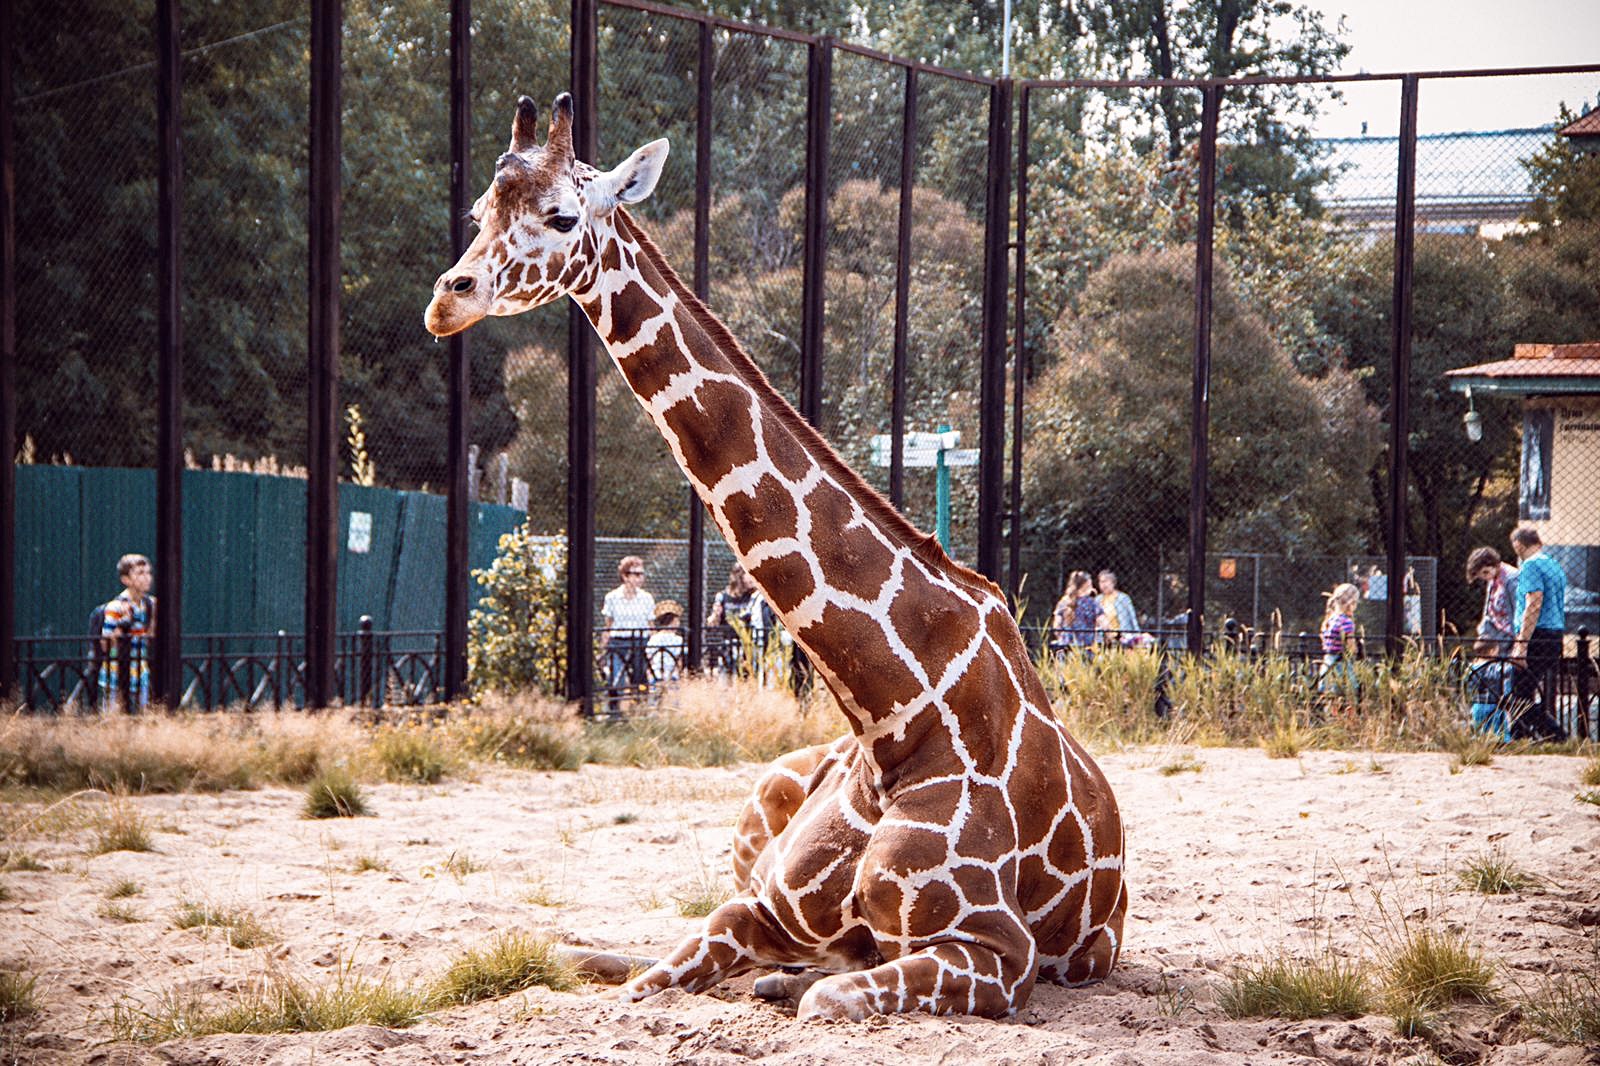 European Zoos Urged To Phase Out Keeping Giraffes In Captivity Following  Born Free's New Report - World Animal News